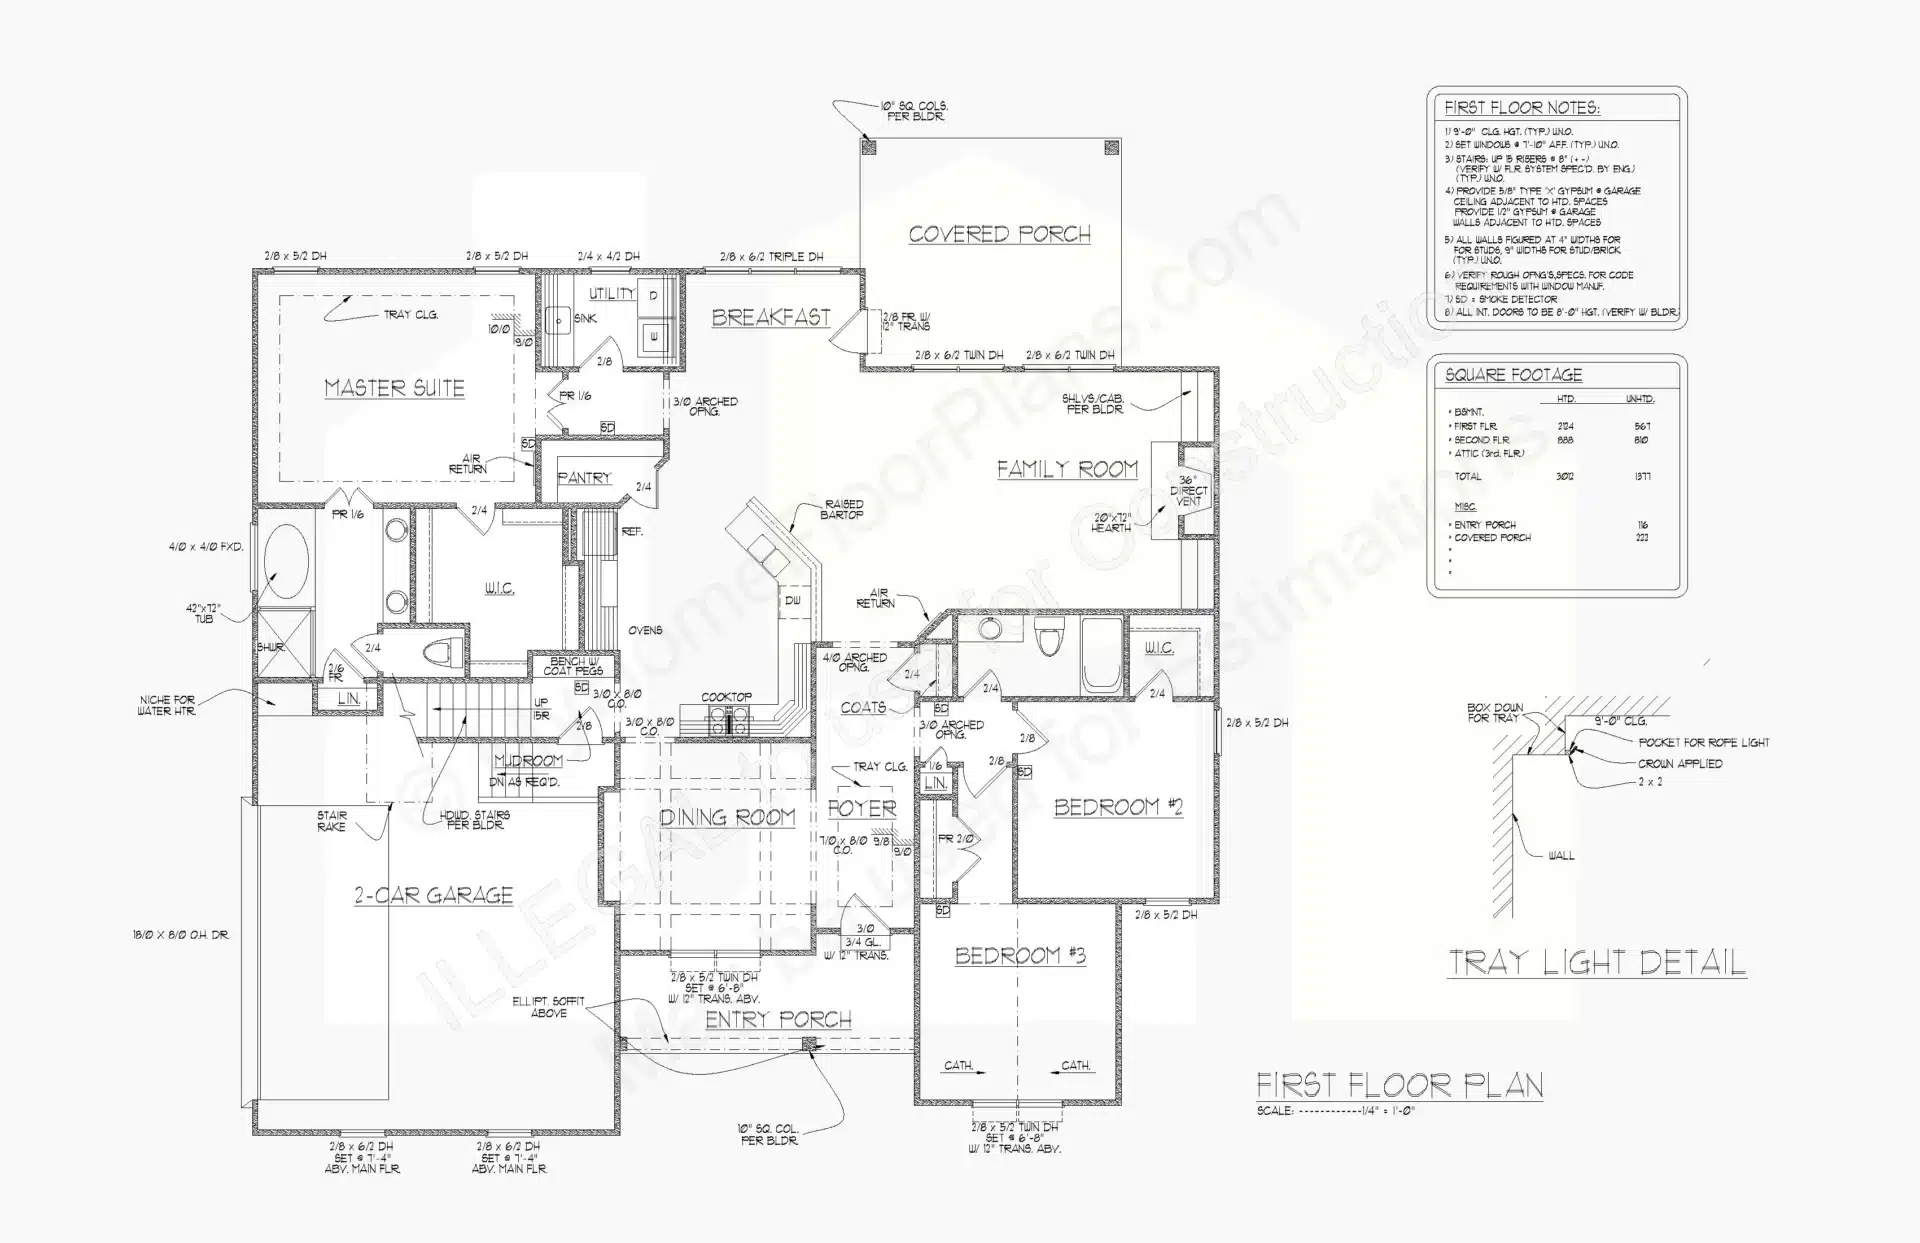 13-1721 my home floor plans_Page_06